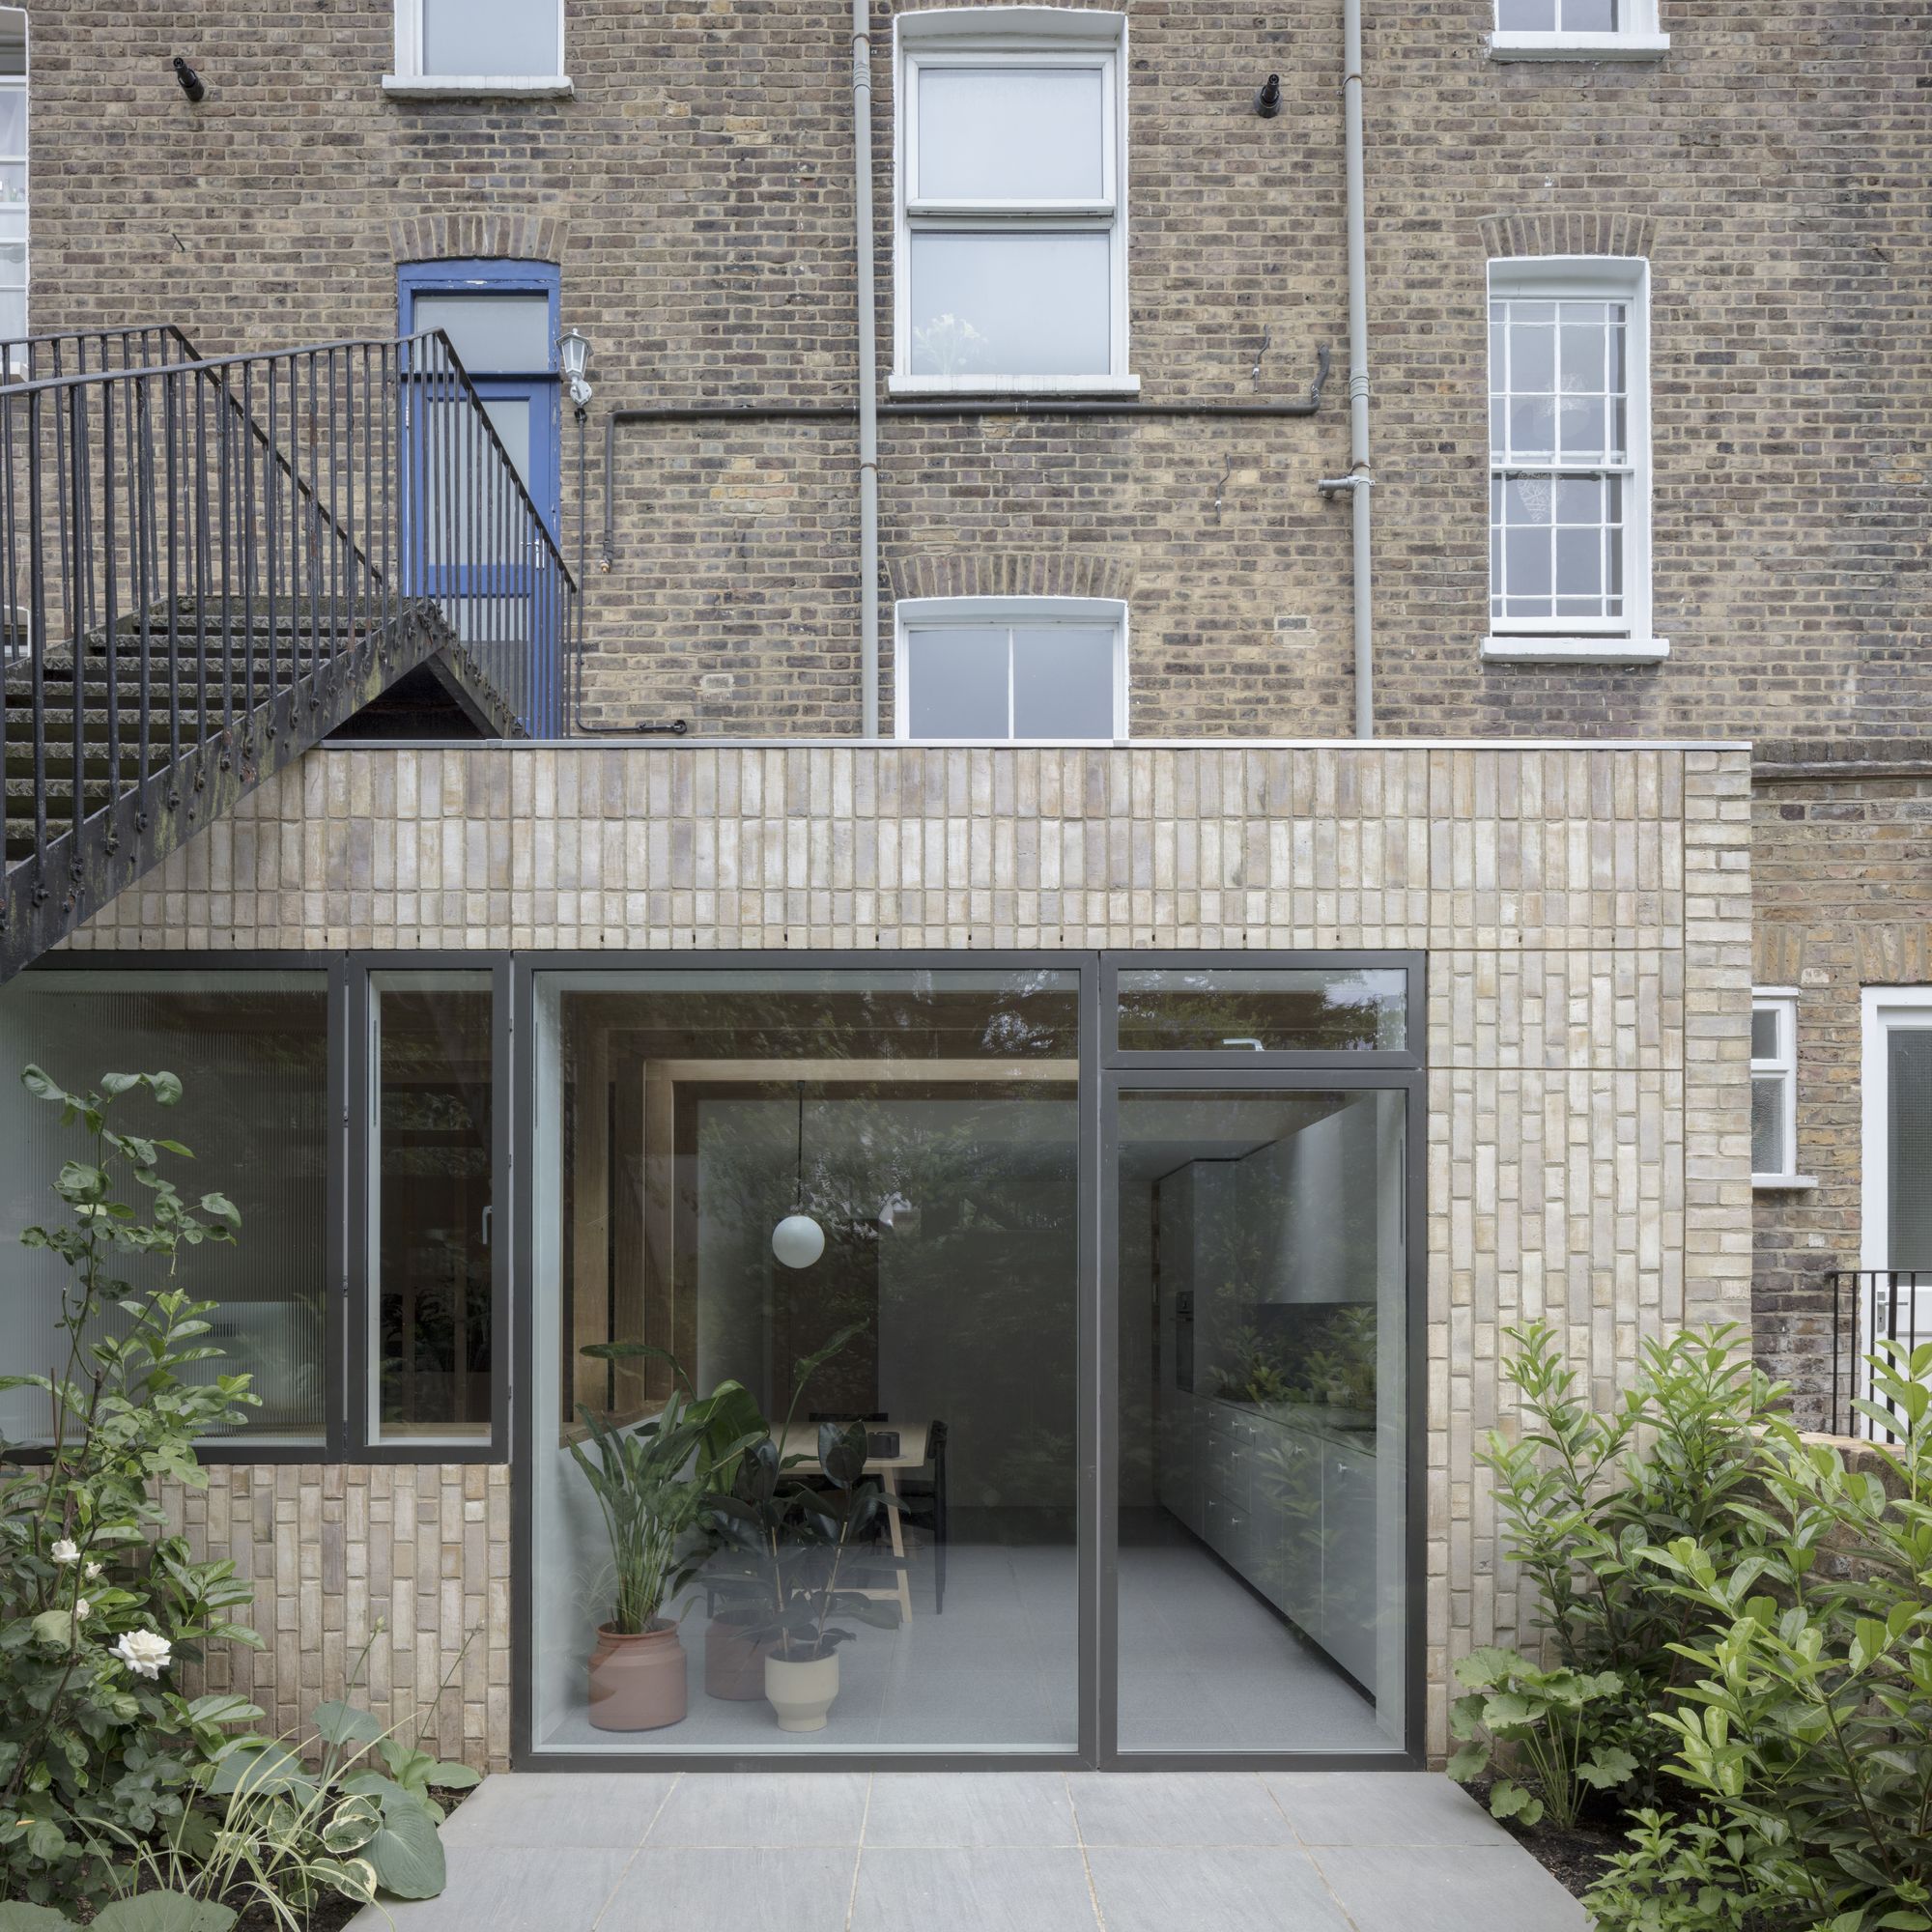 North London House by Architecture for London